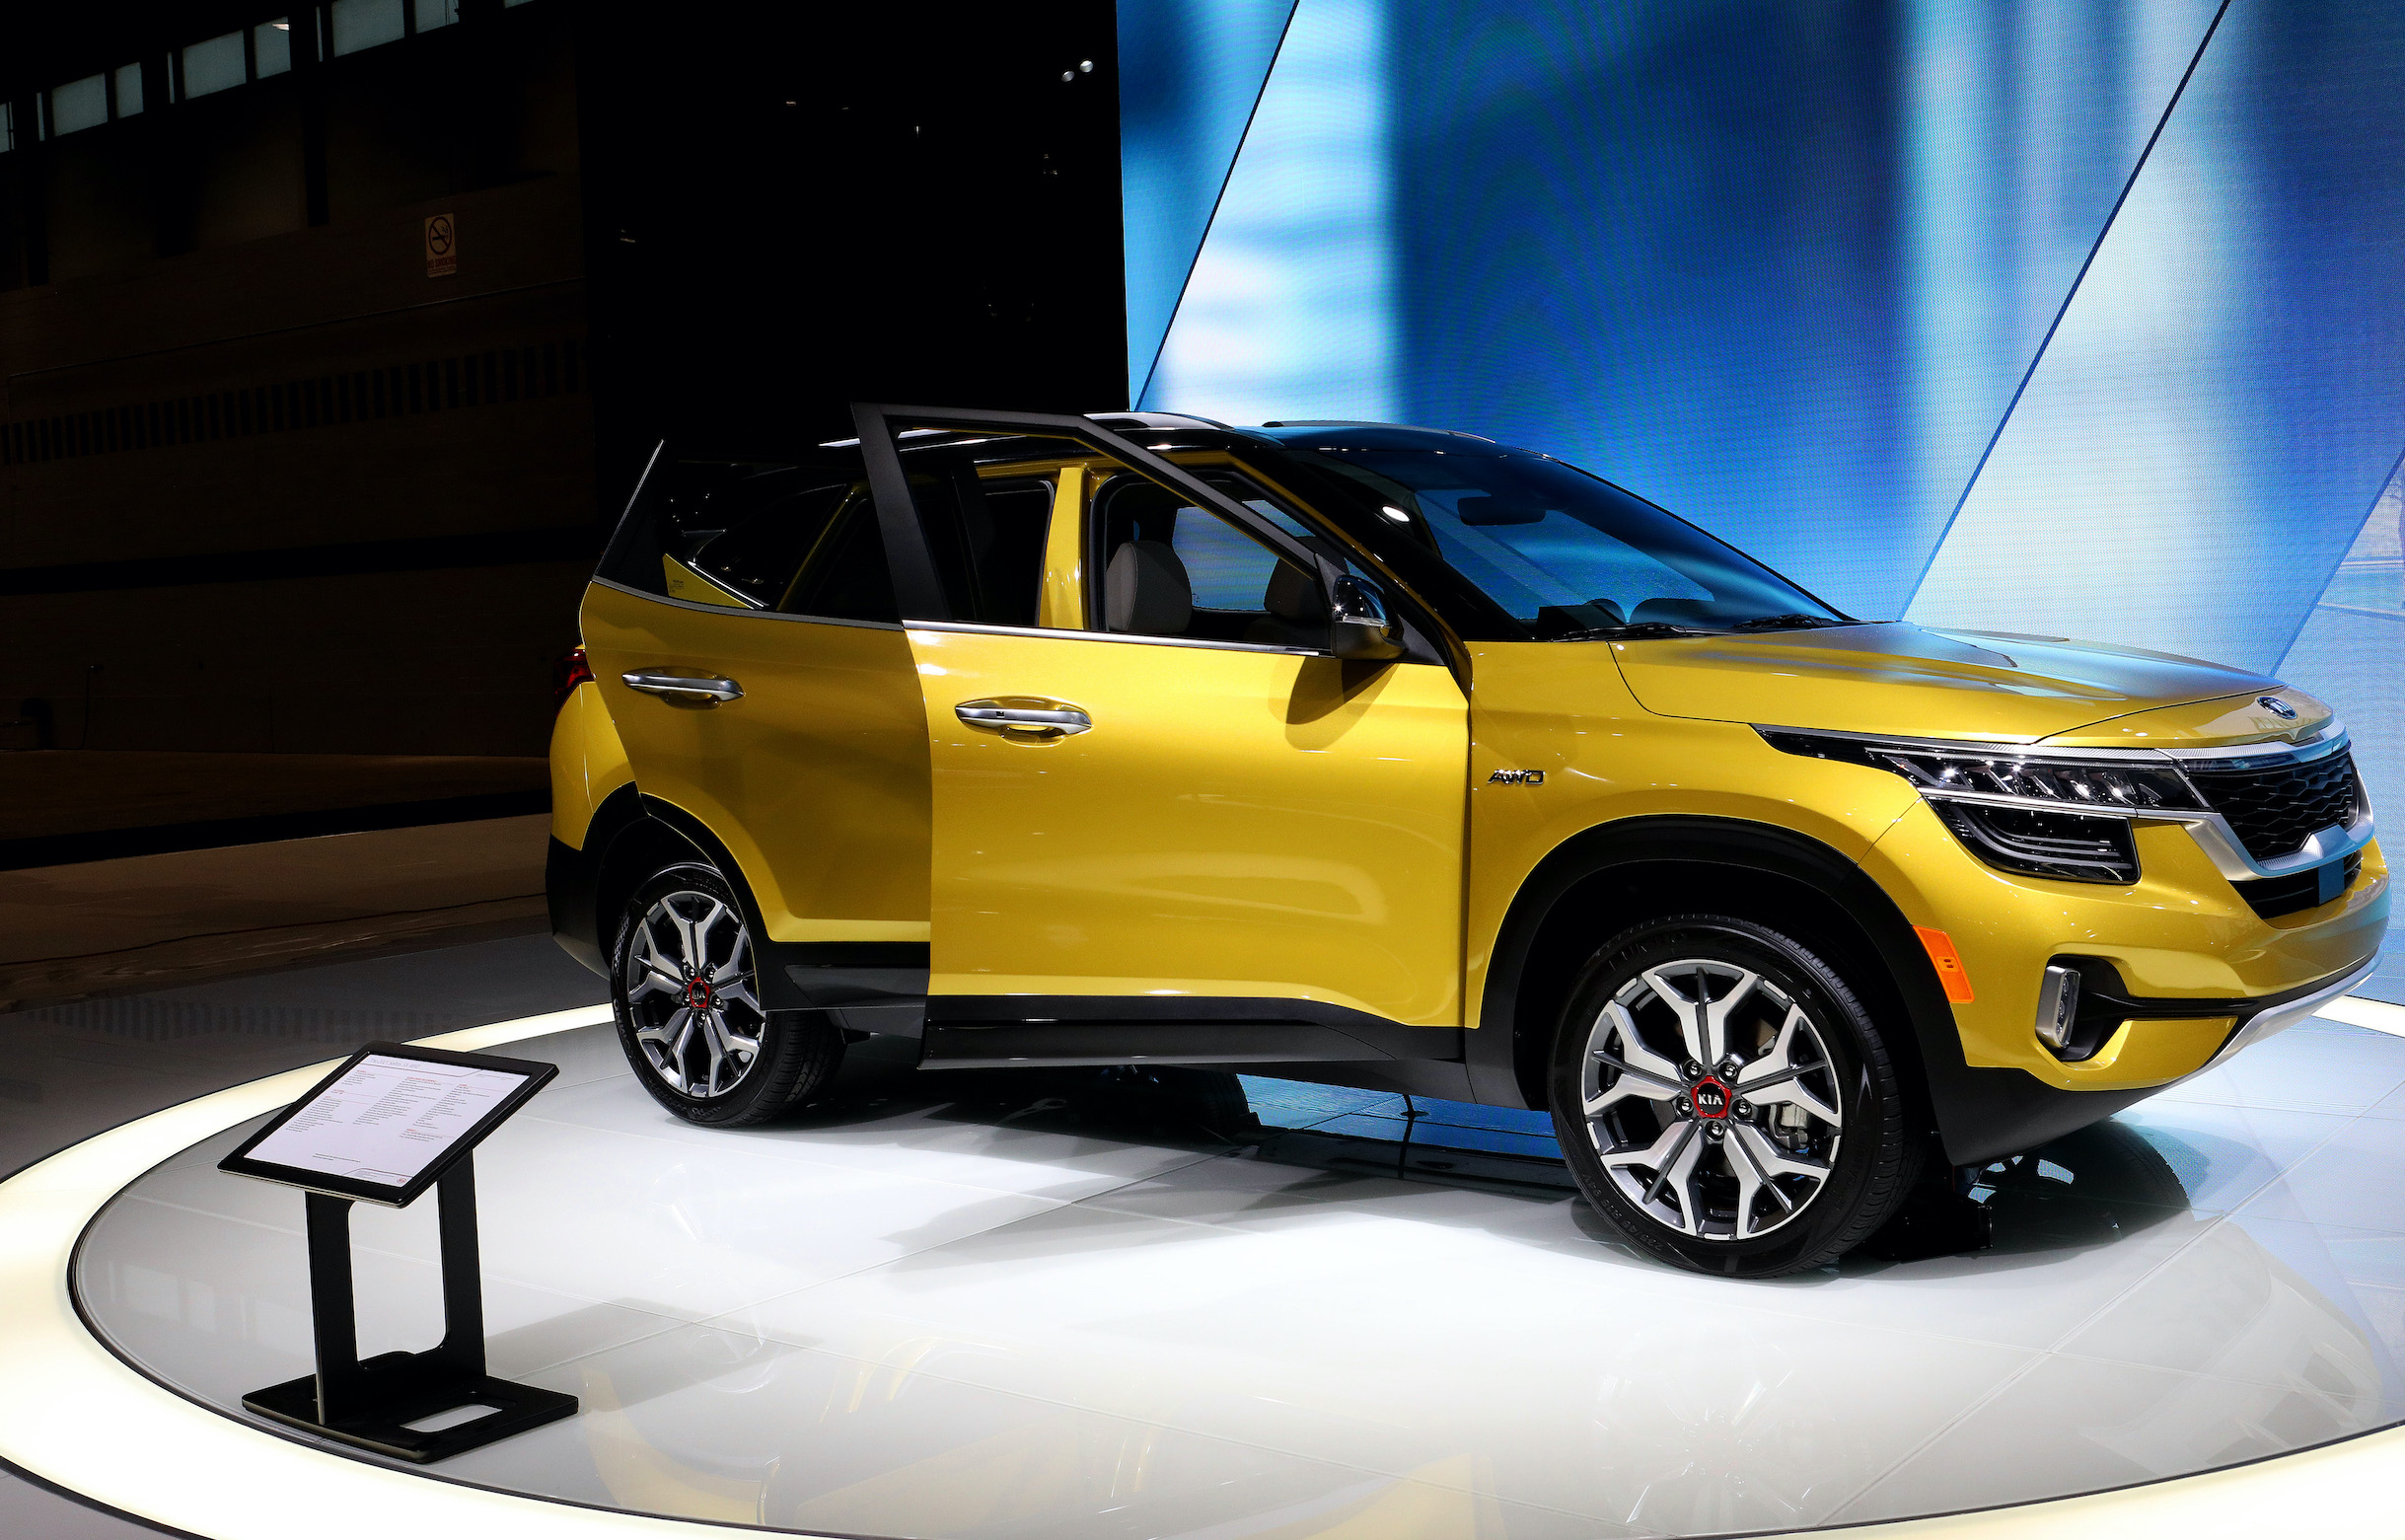 2021 Kia Seltos SX is on display at the 112th Annual Chicago Auto Show